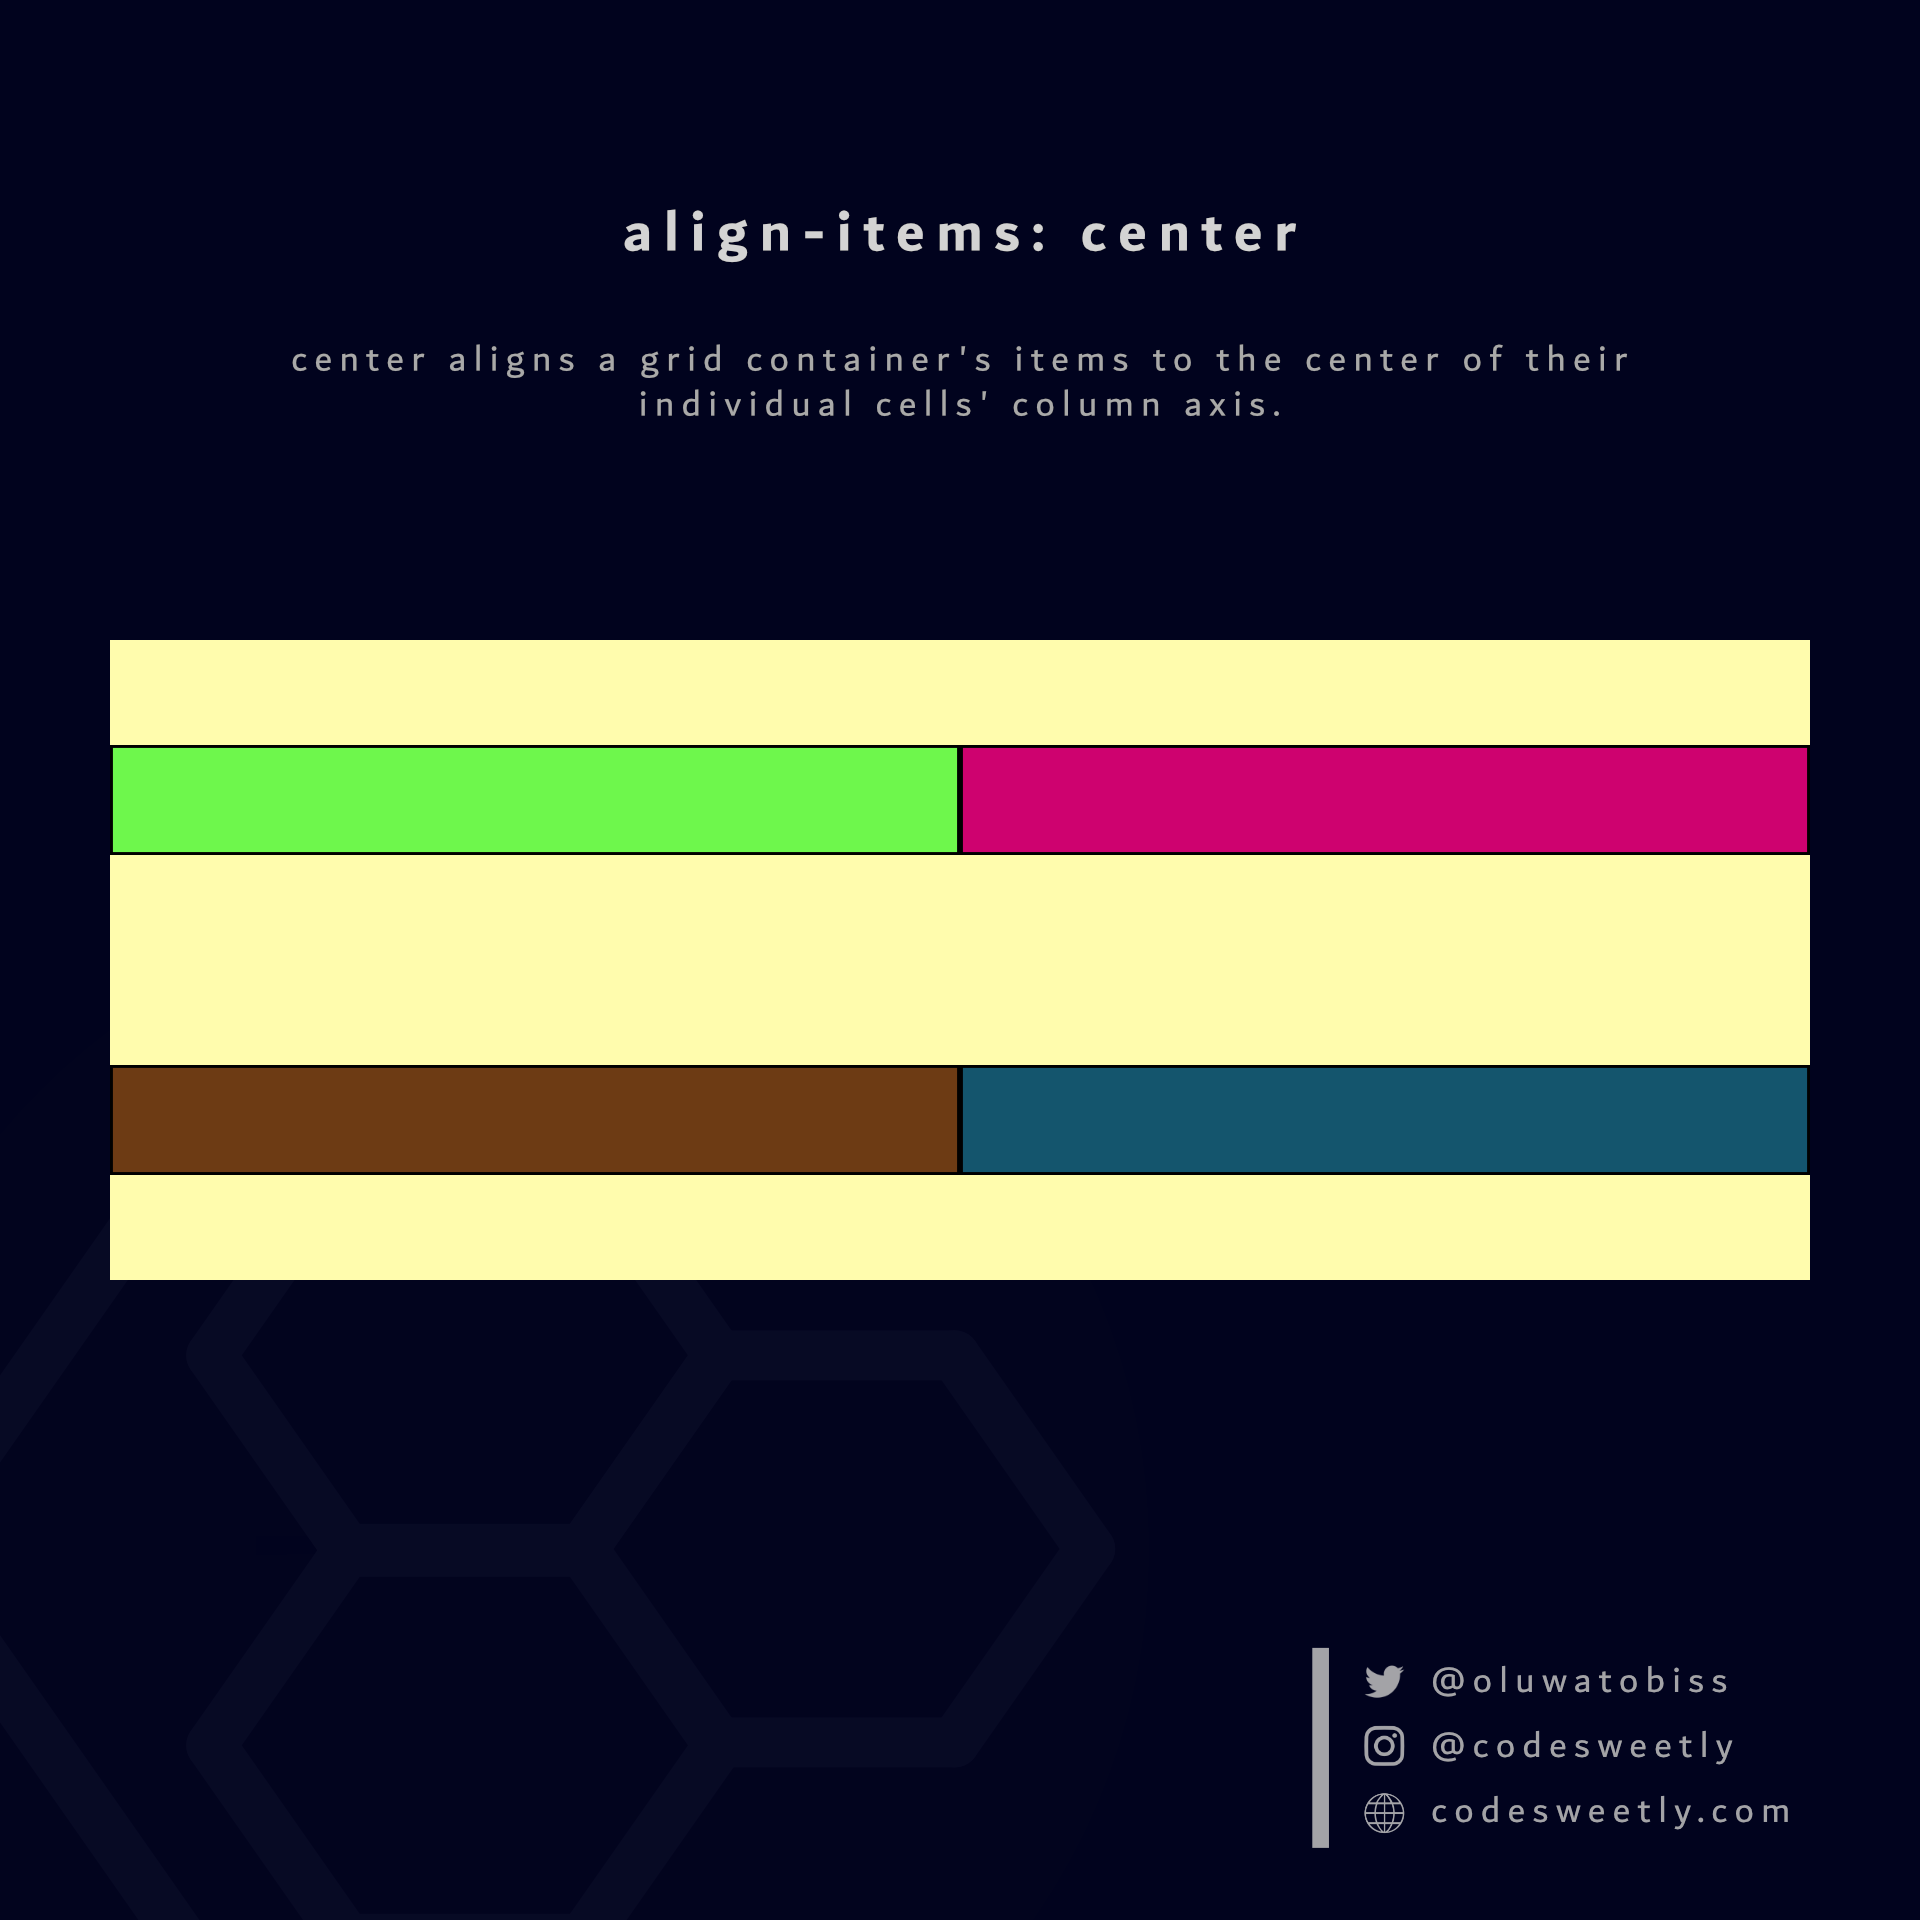 align-items' center value aligns grid items to their individual cells' center